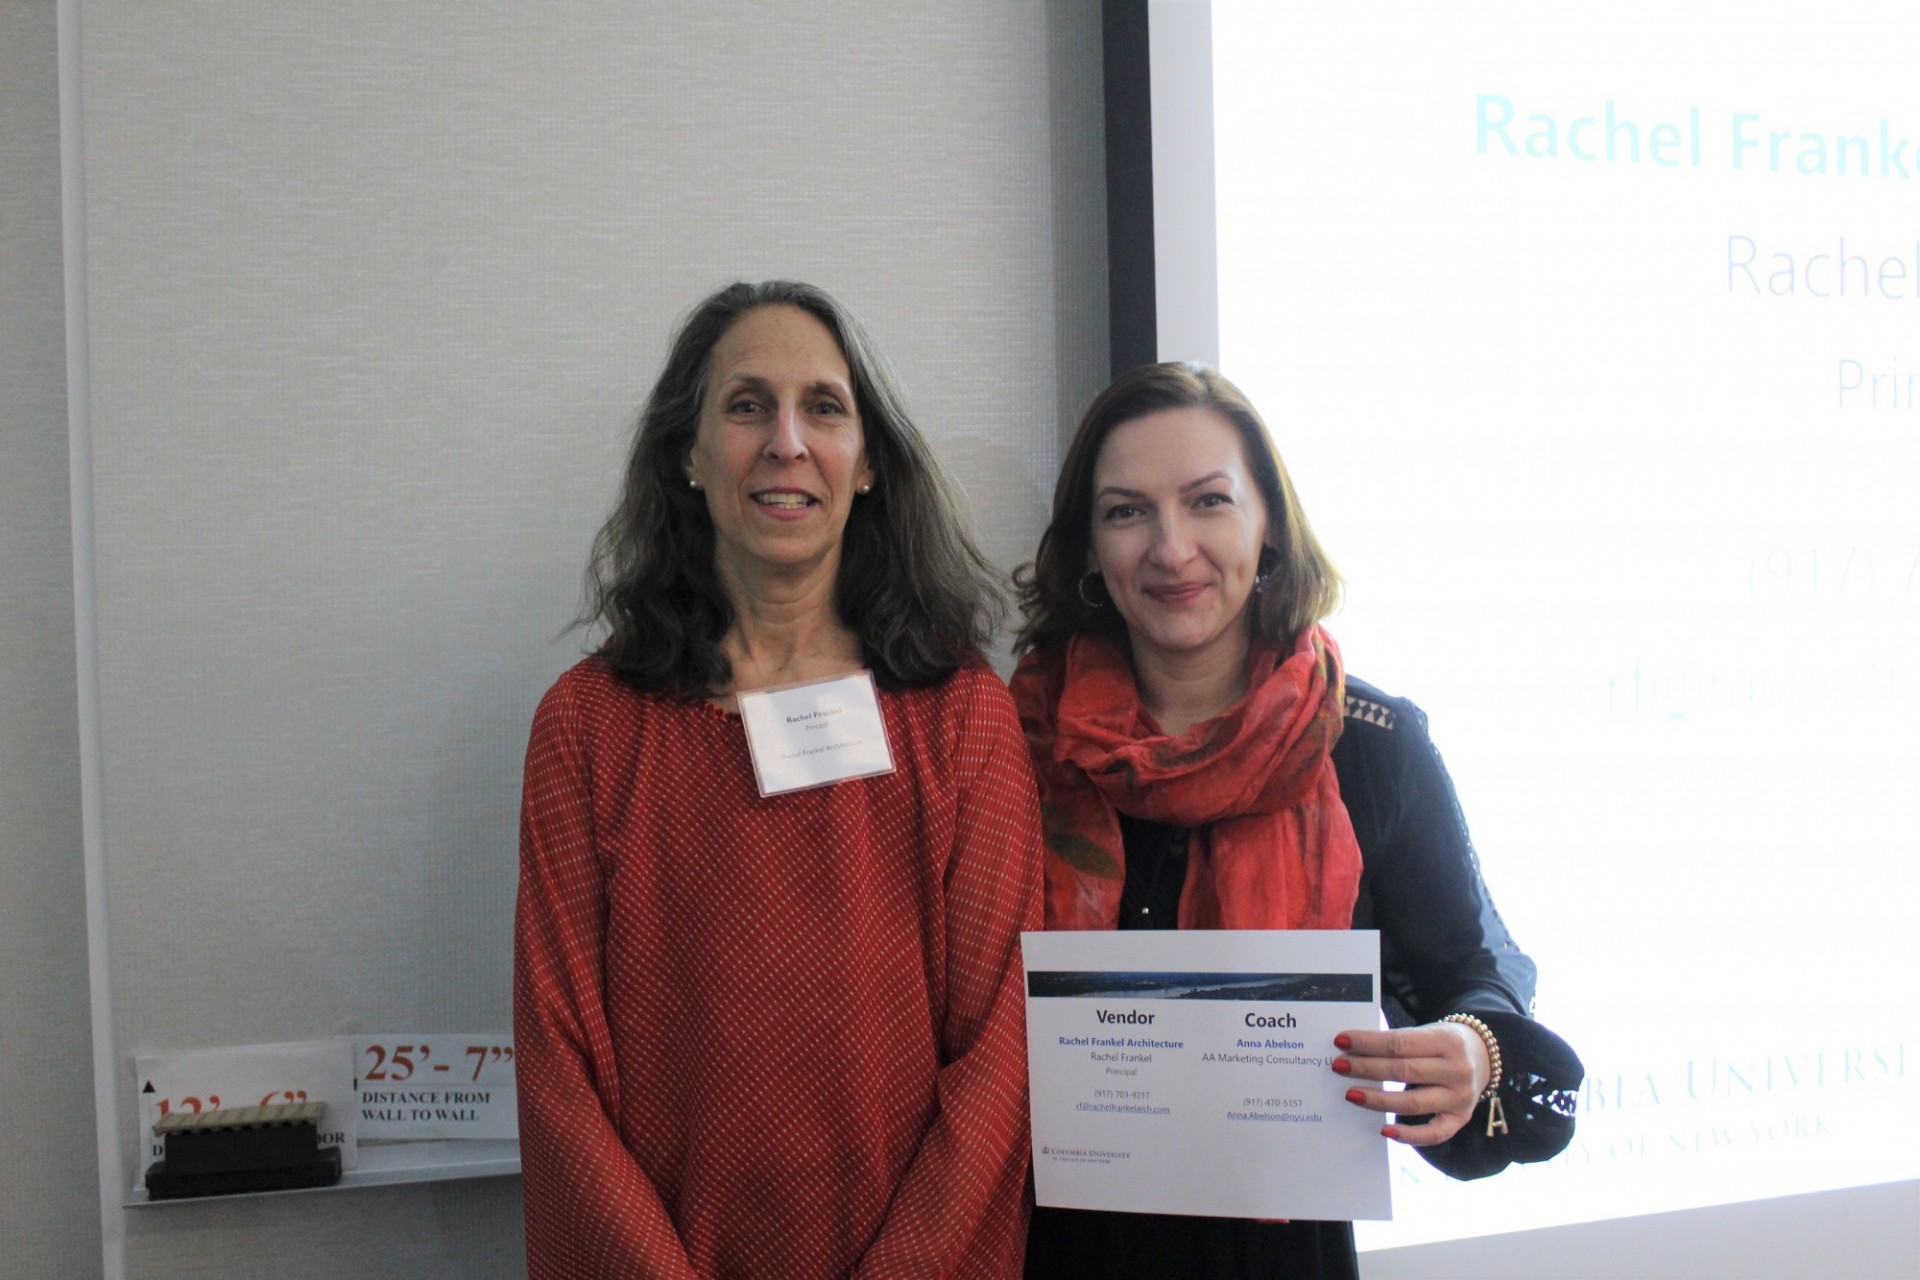 Rachel Frankel, principal of Rachel Frankel Architecture with her dedicated coach, Anna Abelson from AA Marketing Consultancy LLC.